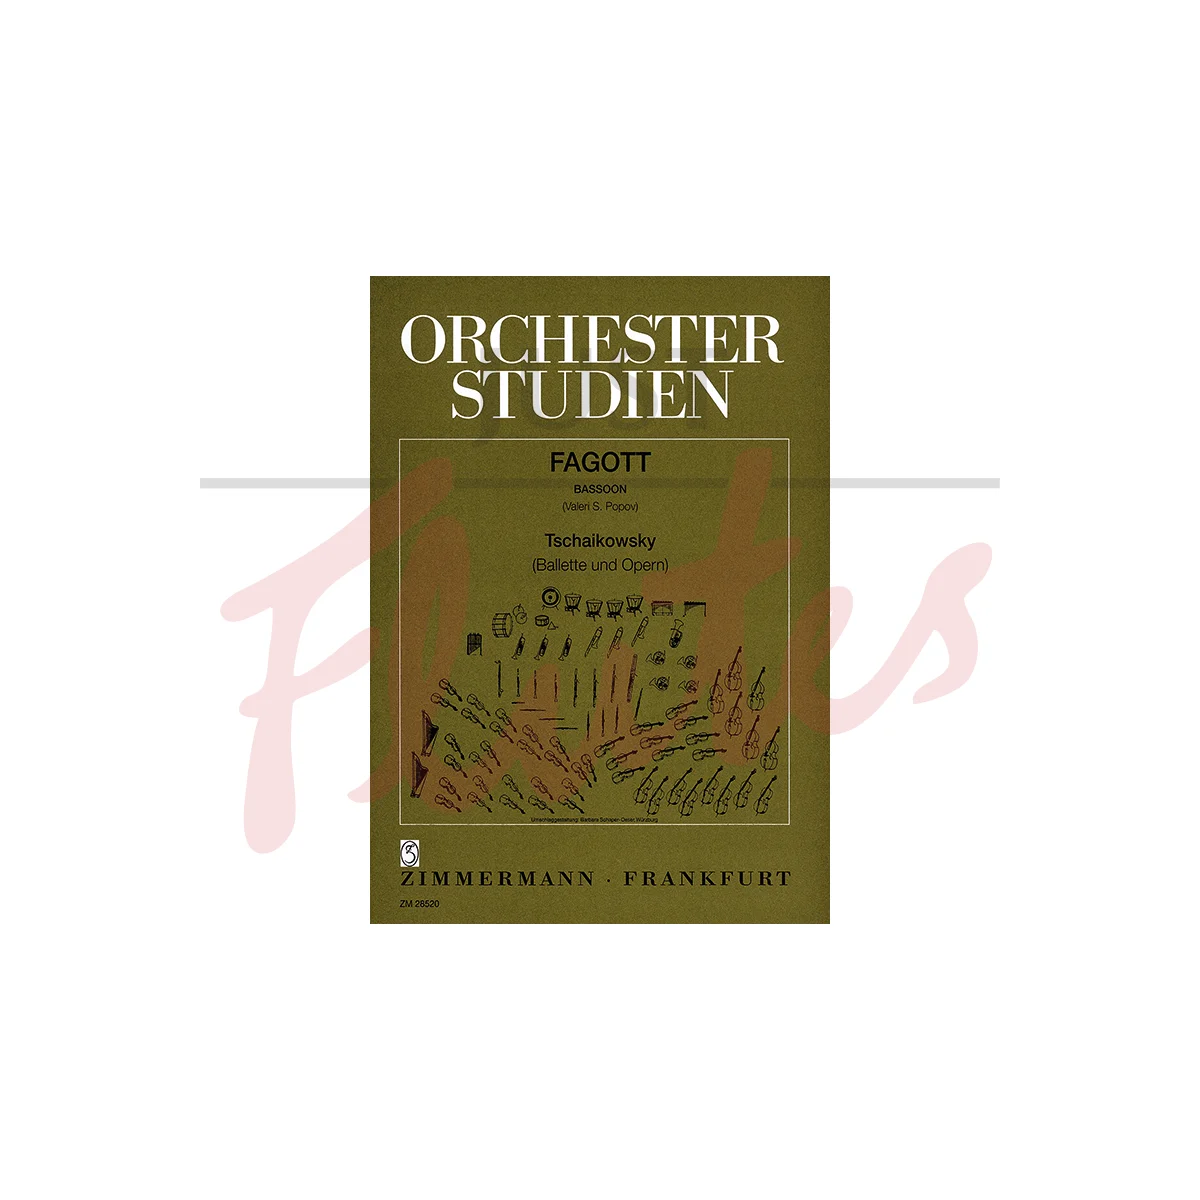 Orchestra Studies for Bassoon - Tchaikovsky Ballets and Operas